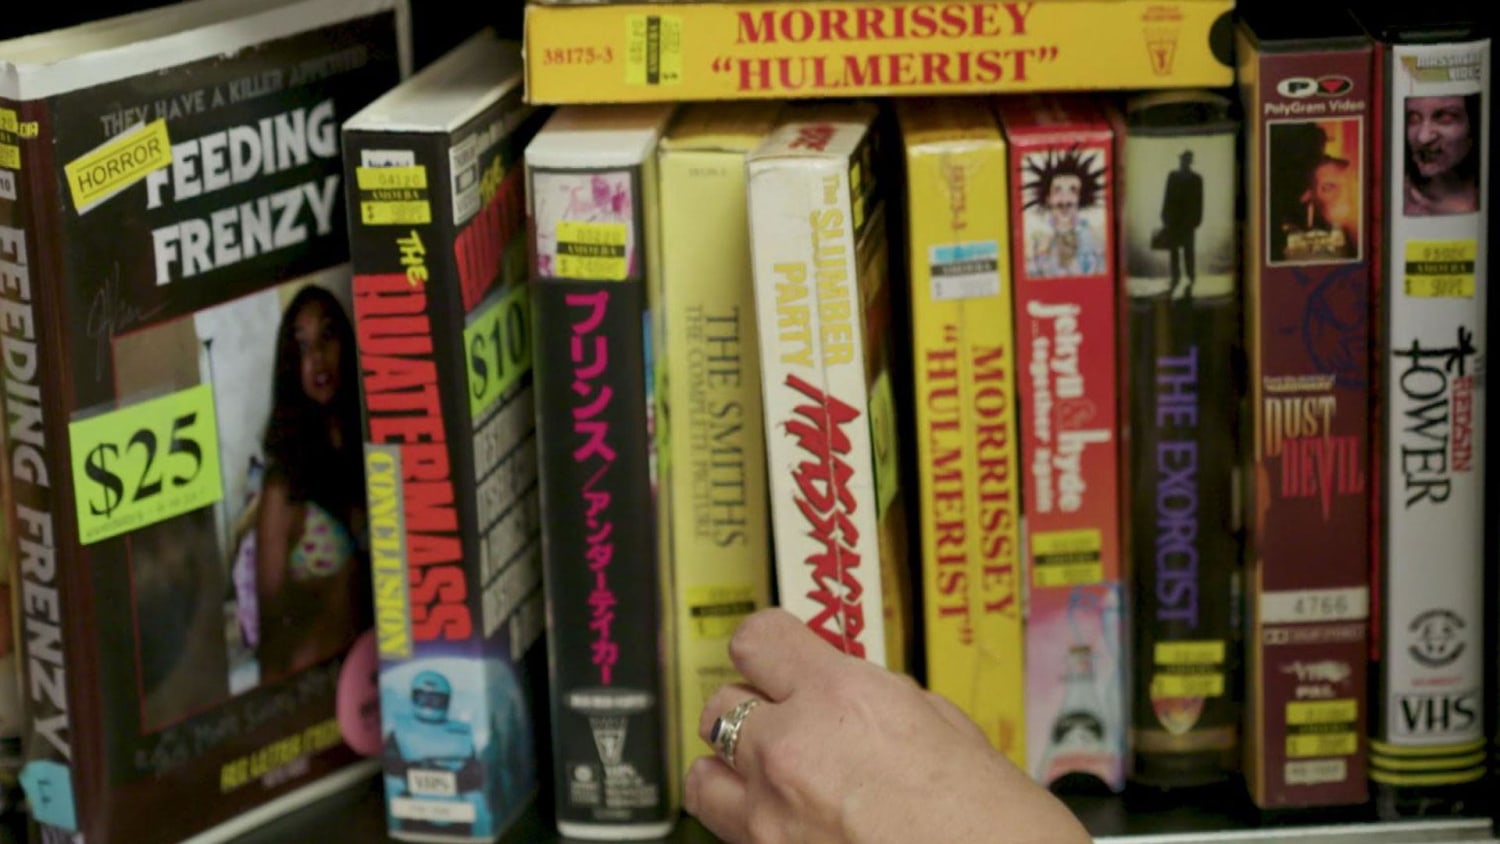 VHS tapes are back in vogue as everything old is new again photo image